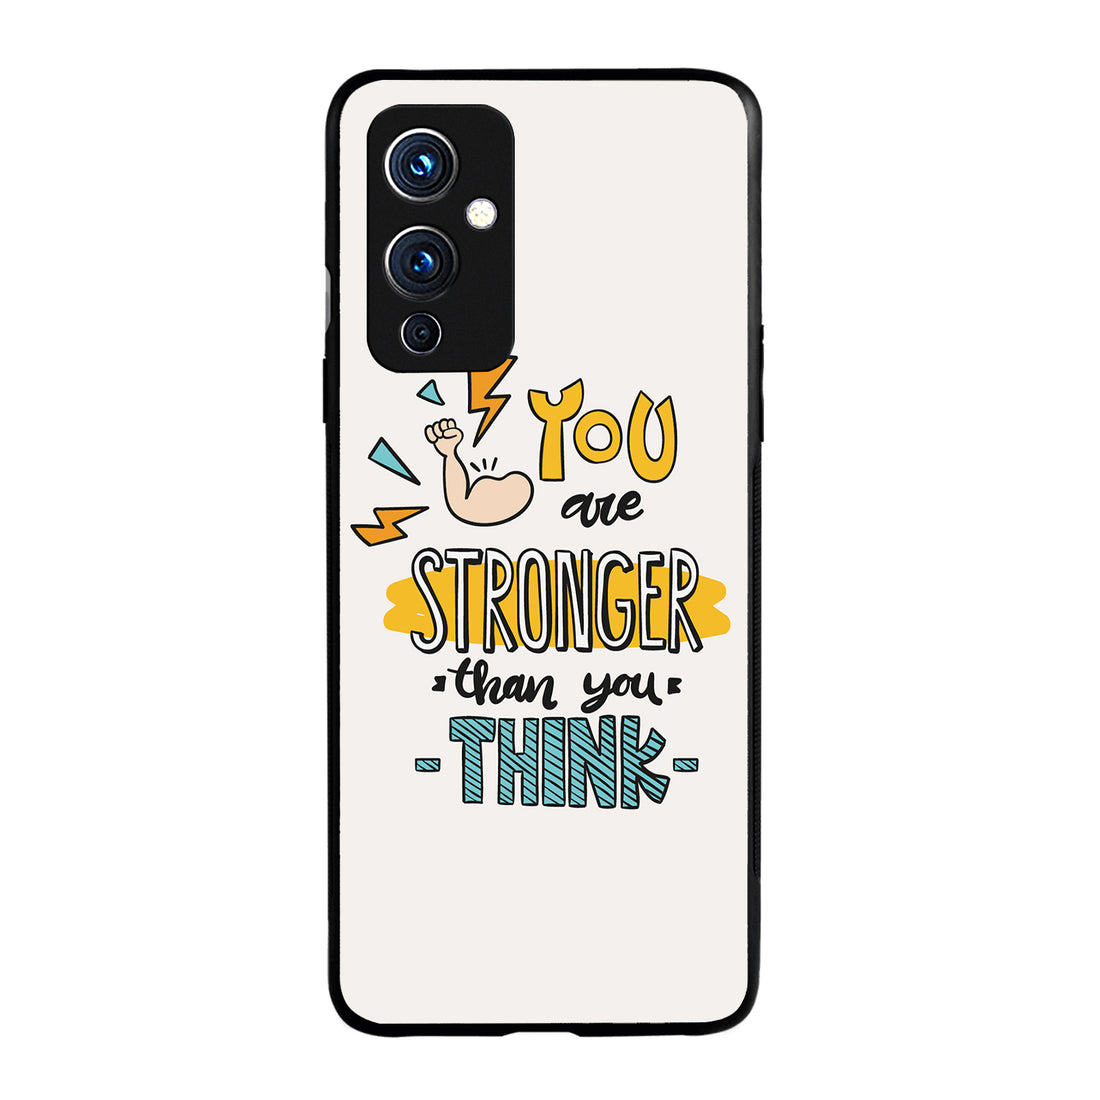 You Are Stronger Motivational Quotes OnePlus 9 Back Case